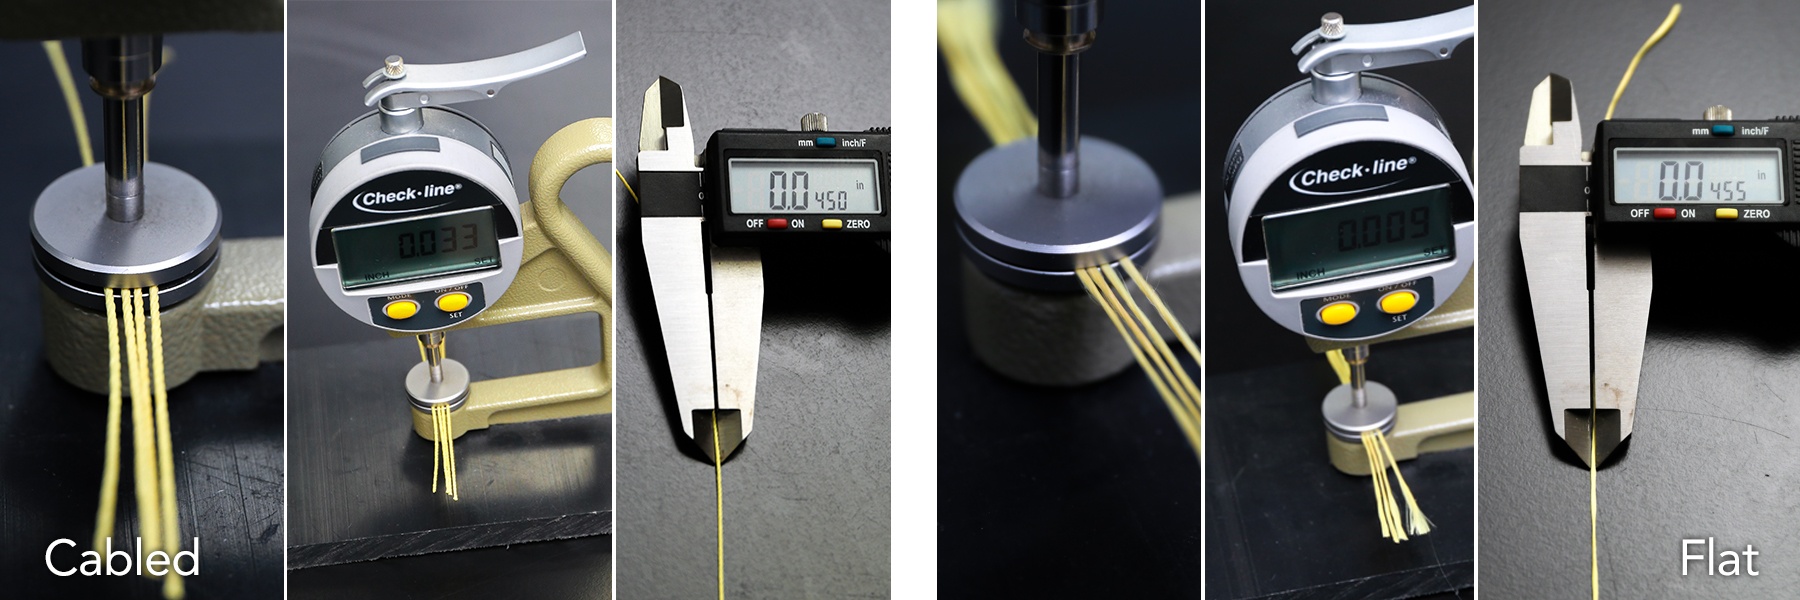 Industrial Sewing Thread Needle Sizes - Which Is Best For Your